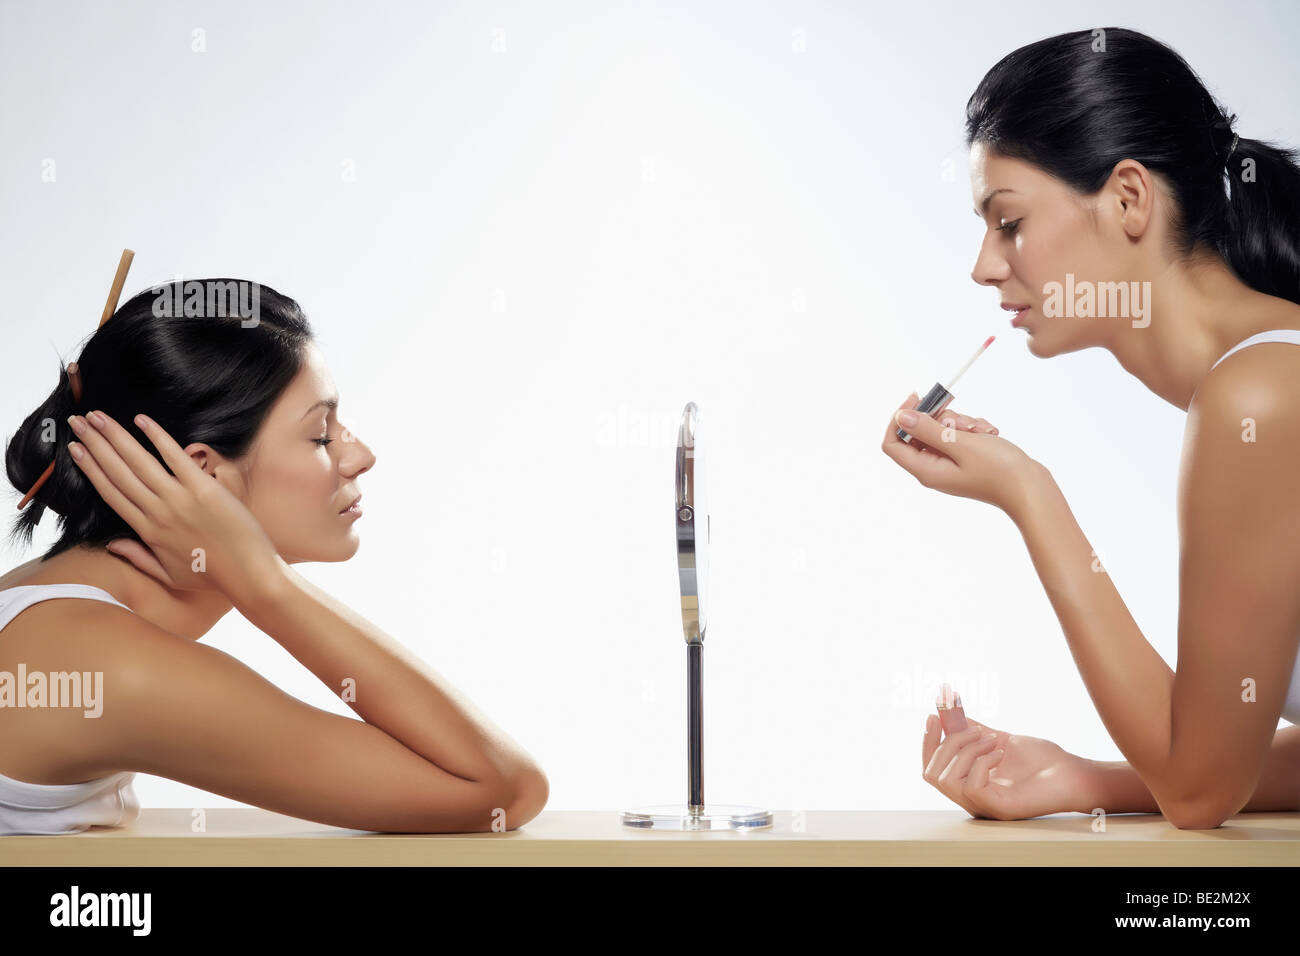 Two young women applying makeup sitting opposite one another, beauty Stock Photo